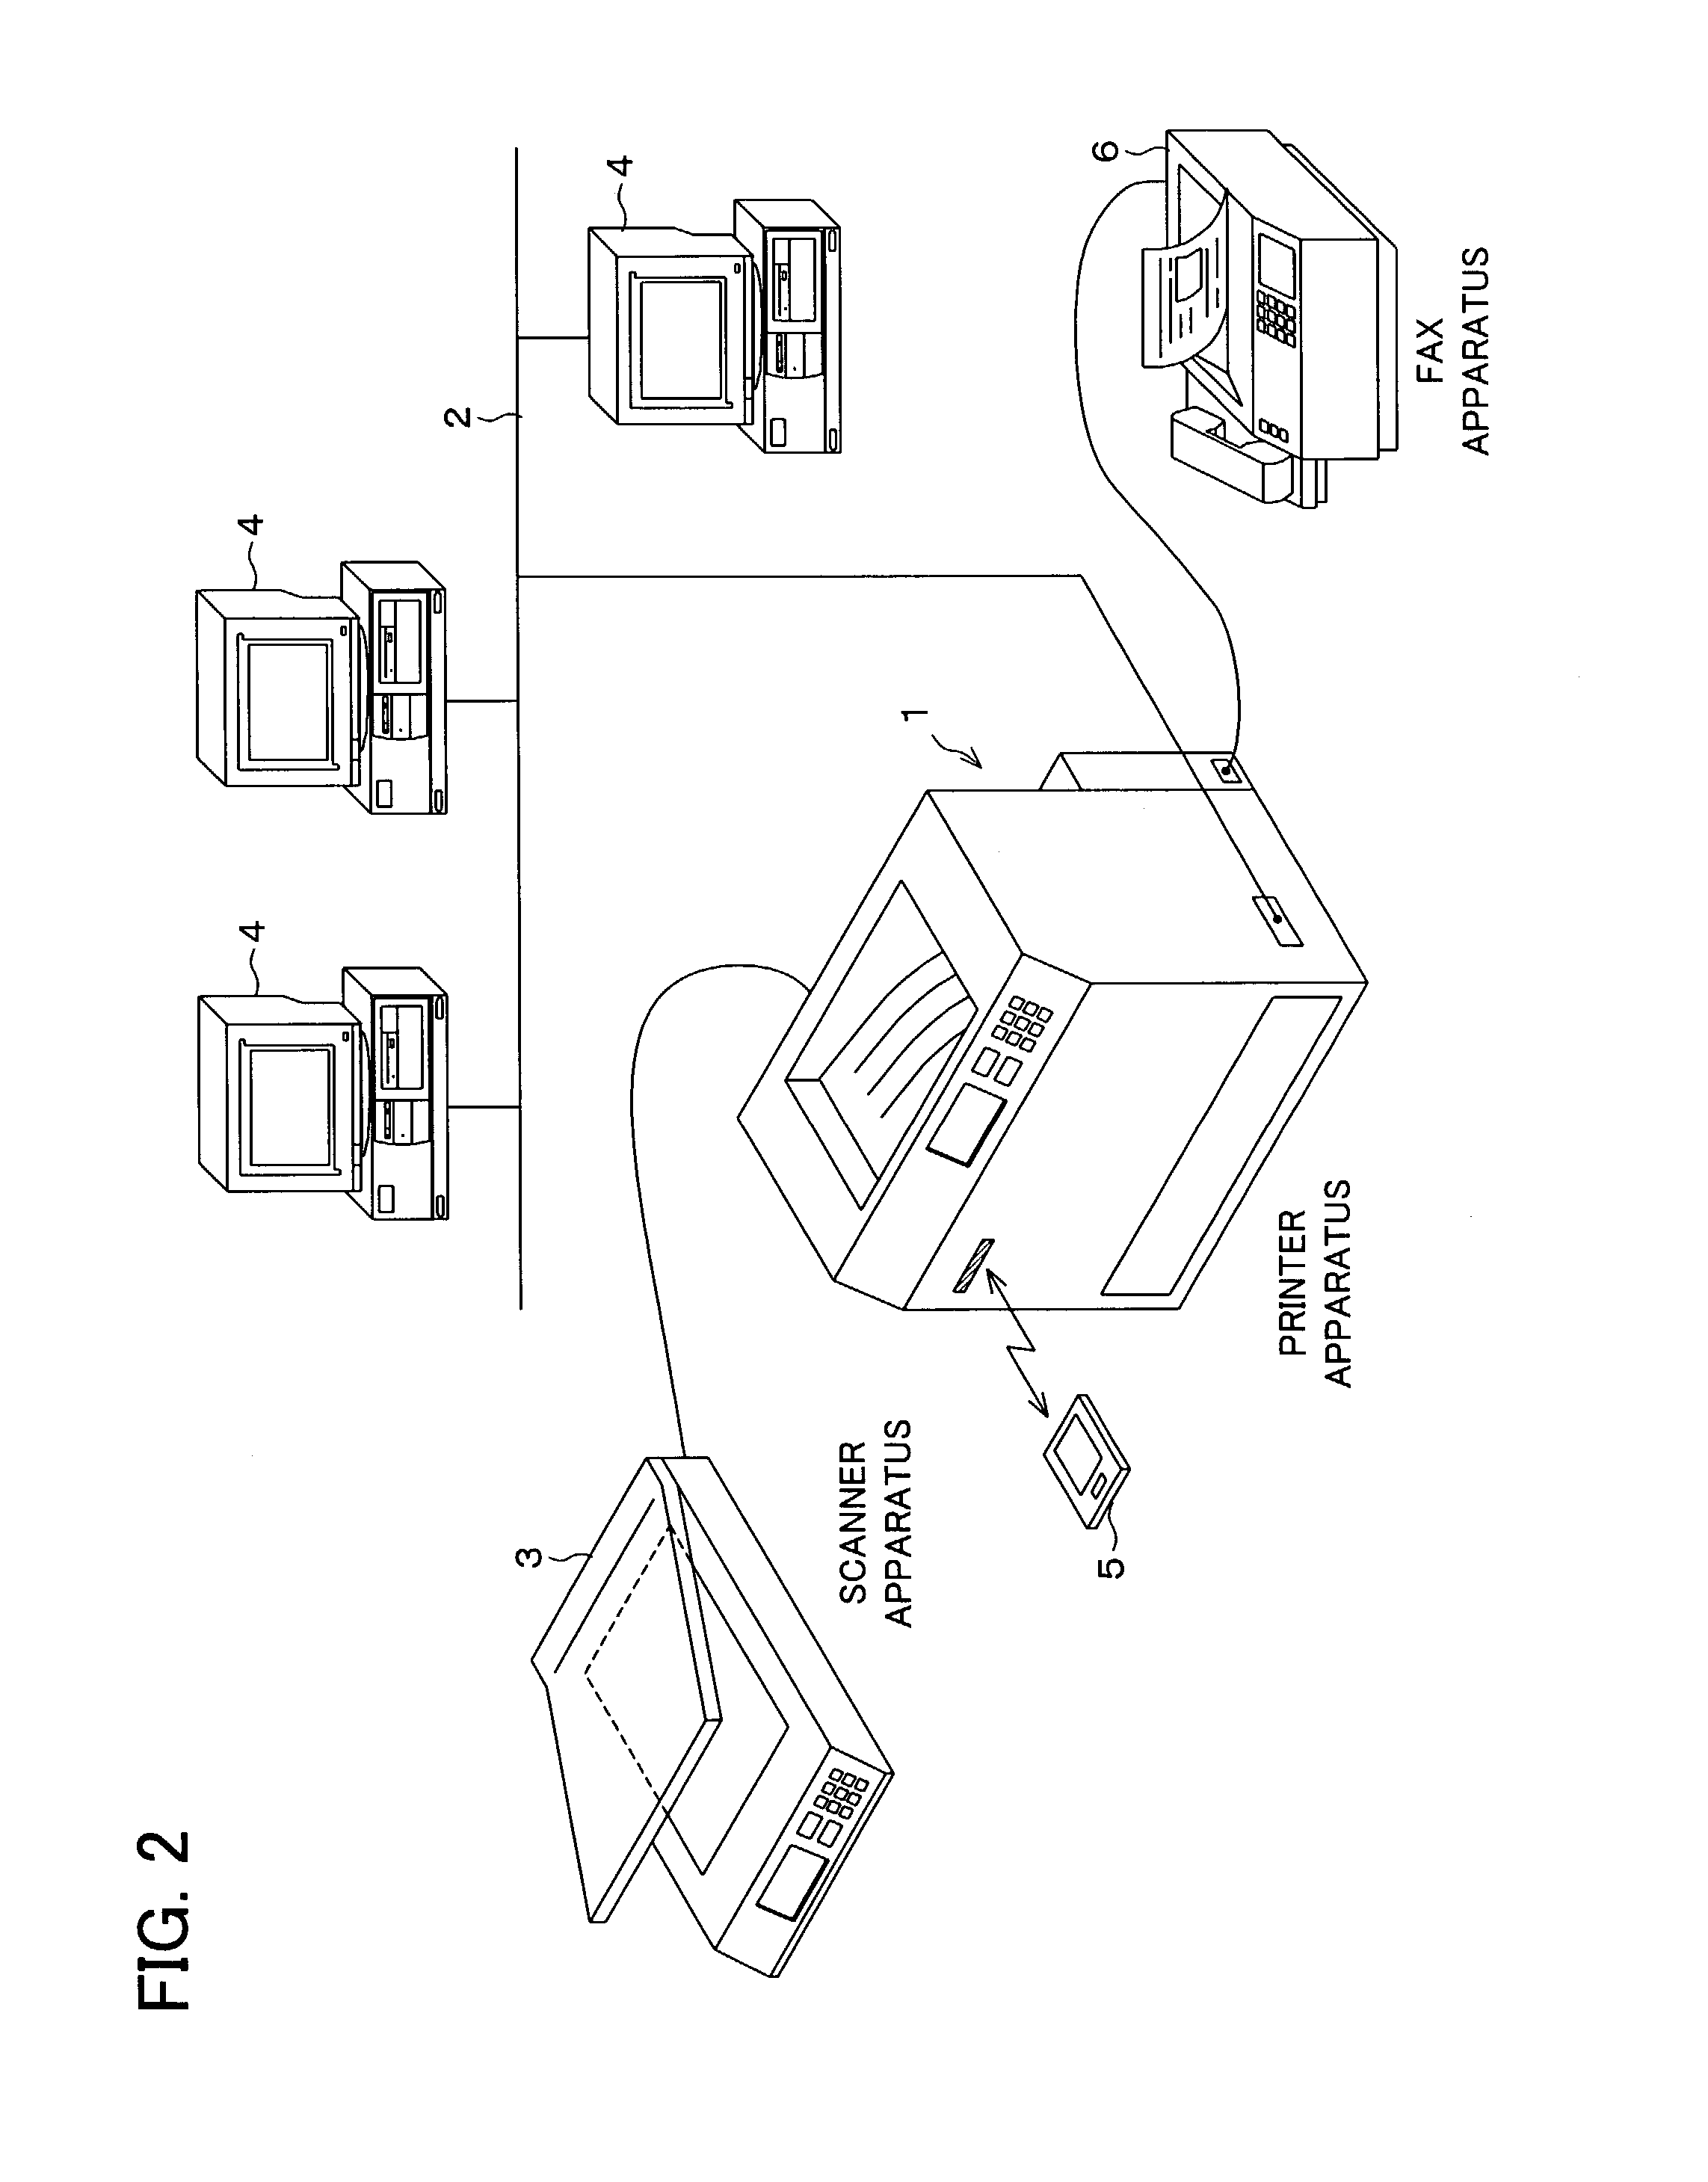 Electrically controlled apparatus